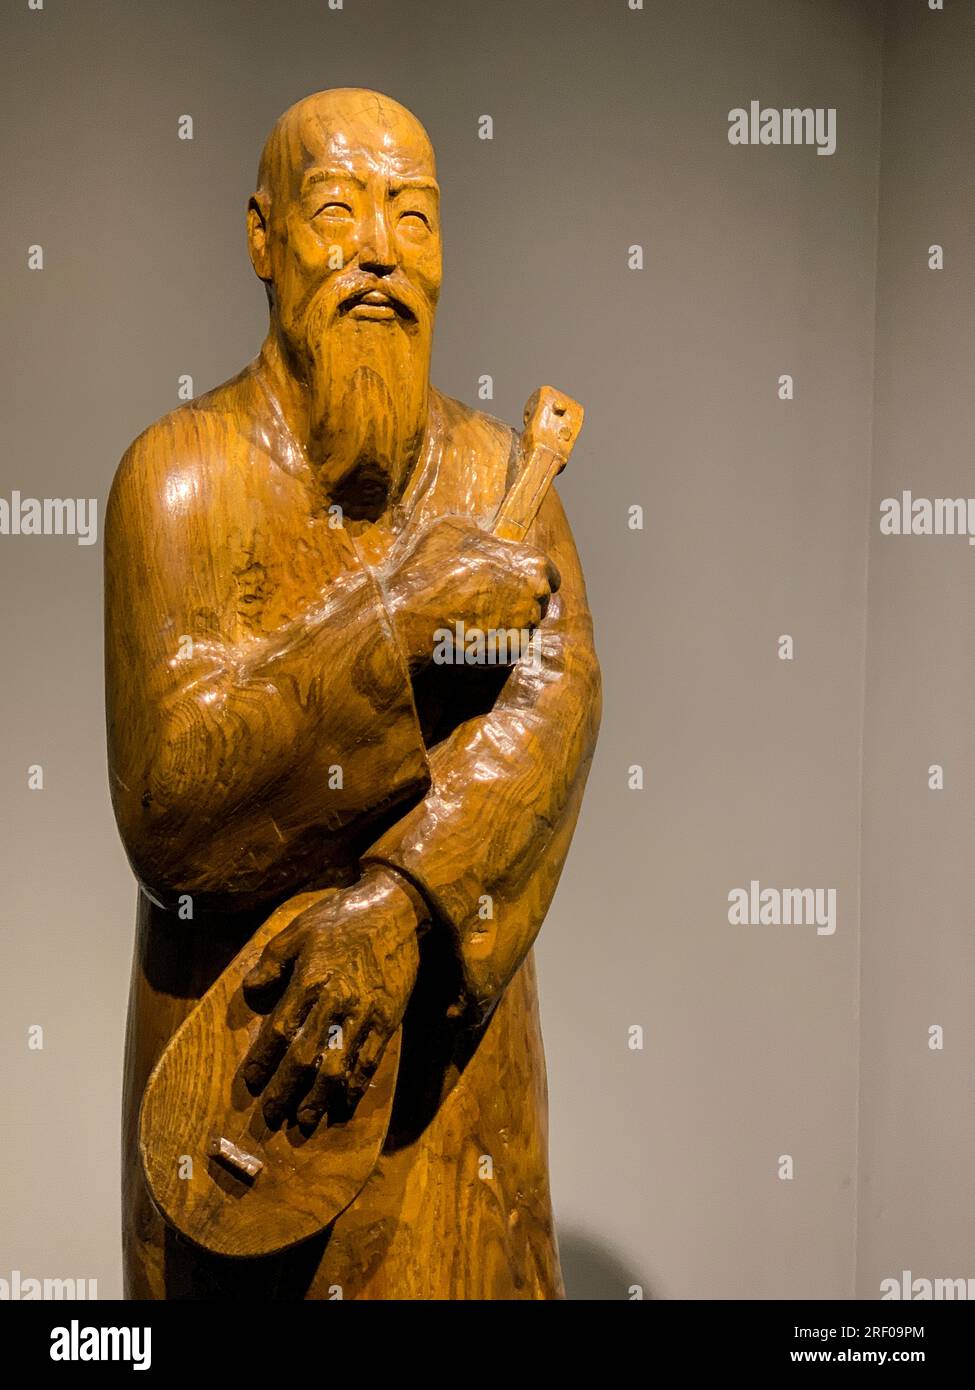 Kazakhstan, Almaty. Statue of Korkyt Ata, a semi-mythical musician and composer of the 10th century. Museum of Folk Musical Instruments. Stock Photo